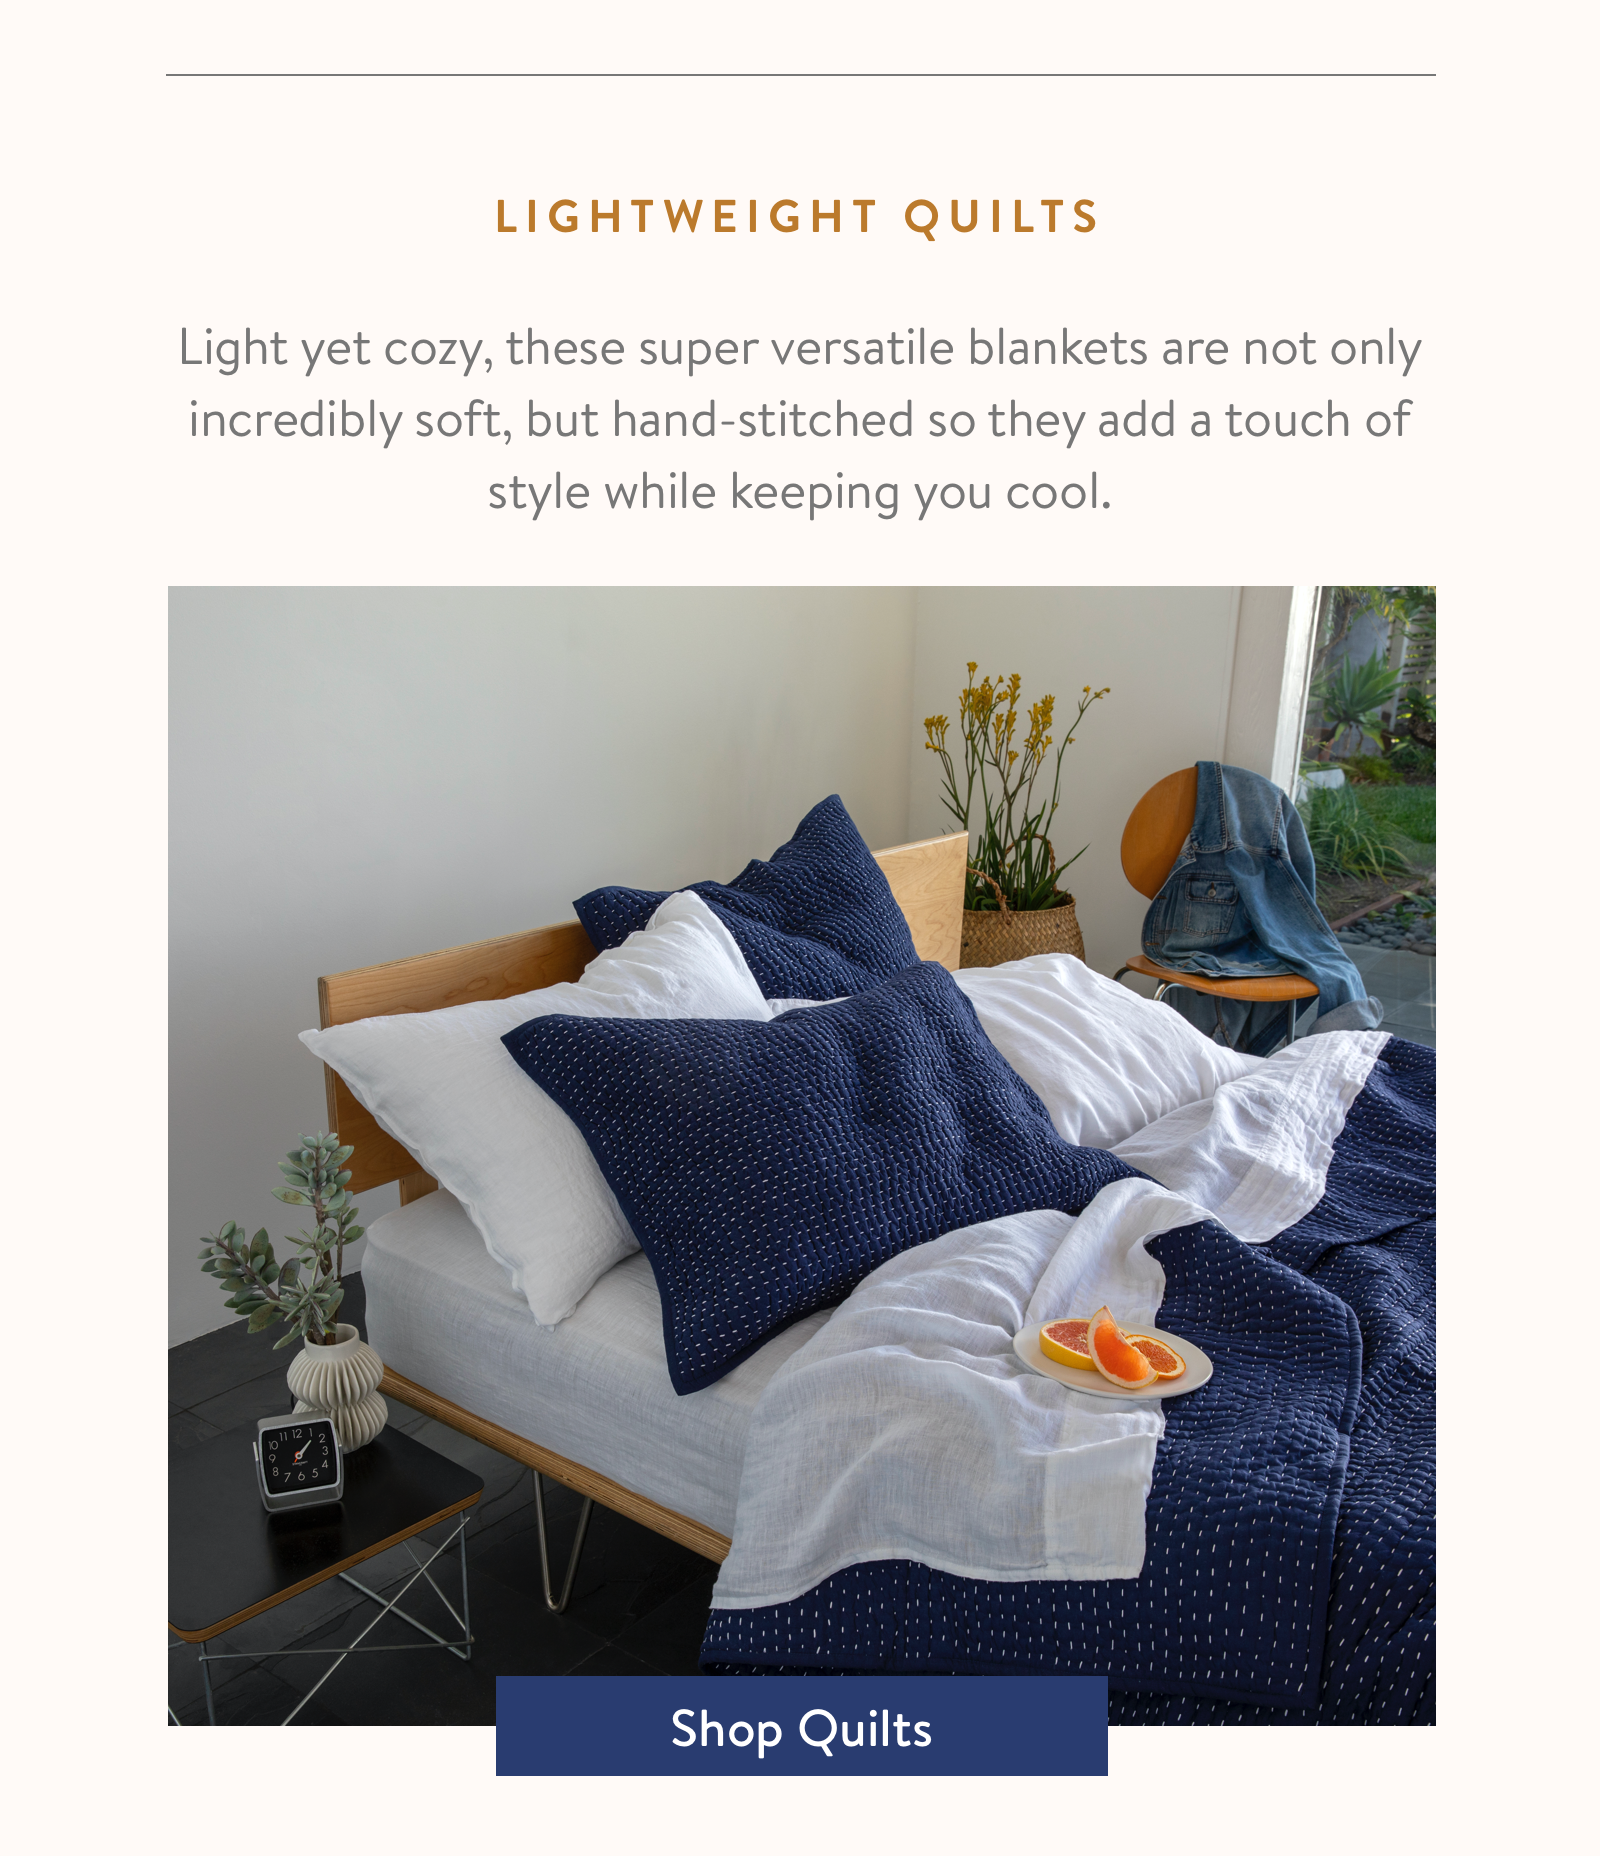 Light yet cozy, these super versatile blankets are not only incredibly soft, but hand-stitched so they add a touch of style while keeping you cool.